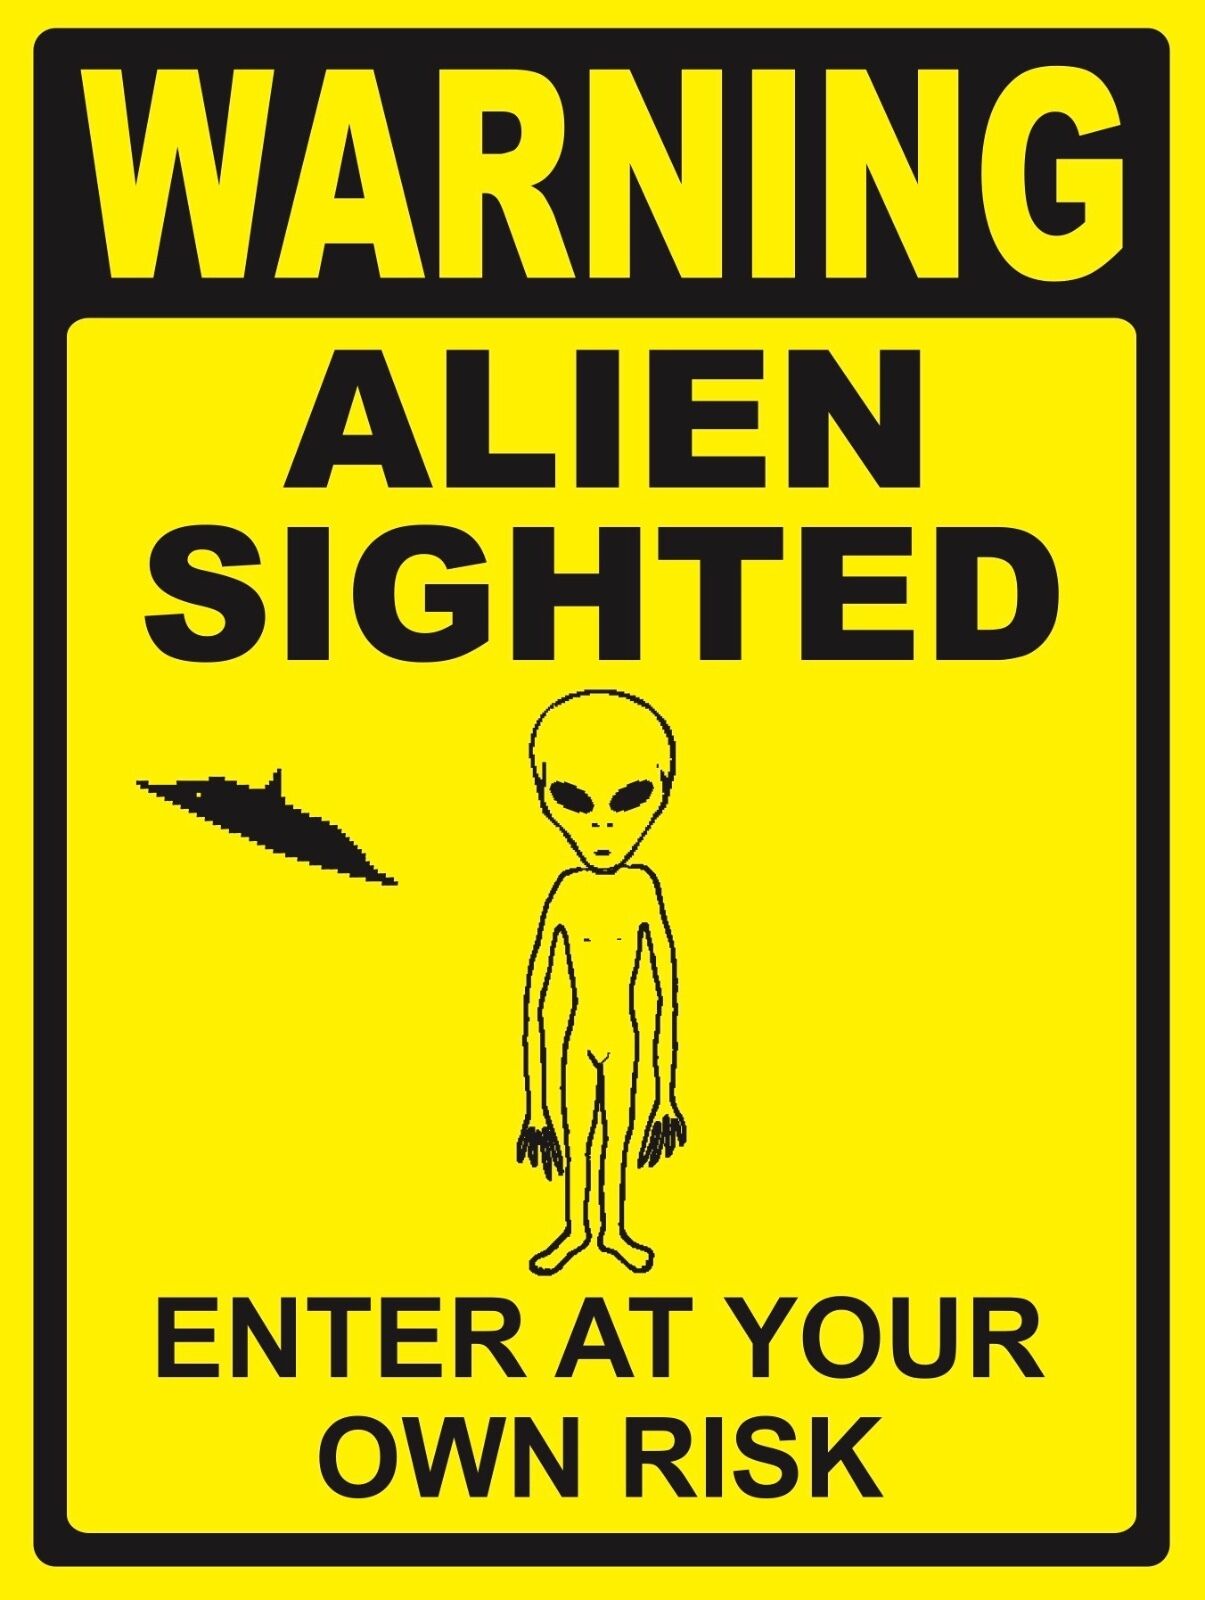 ALIEN SIGHTED SIGN - WARNING SIGN- #PS-469/70 - LARGE SIZE